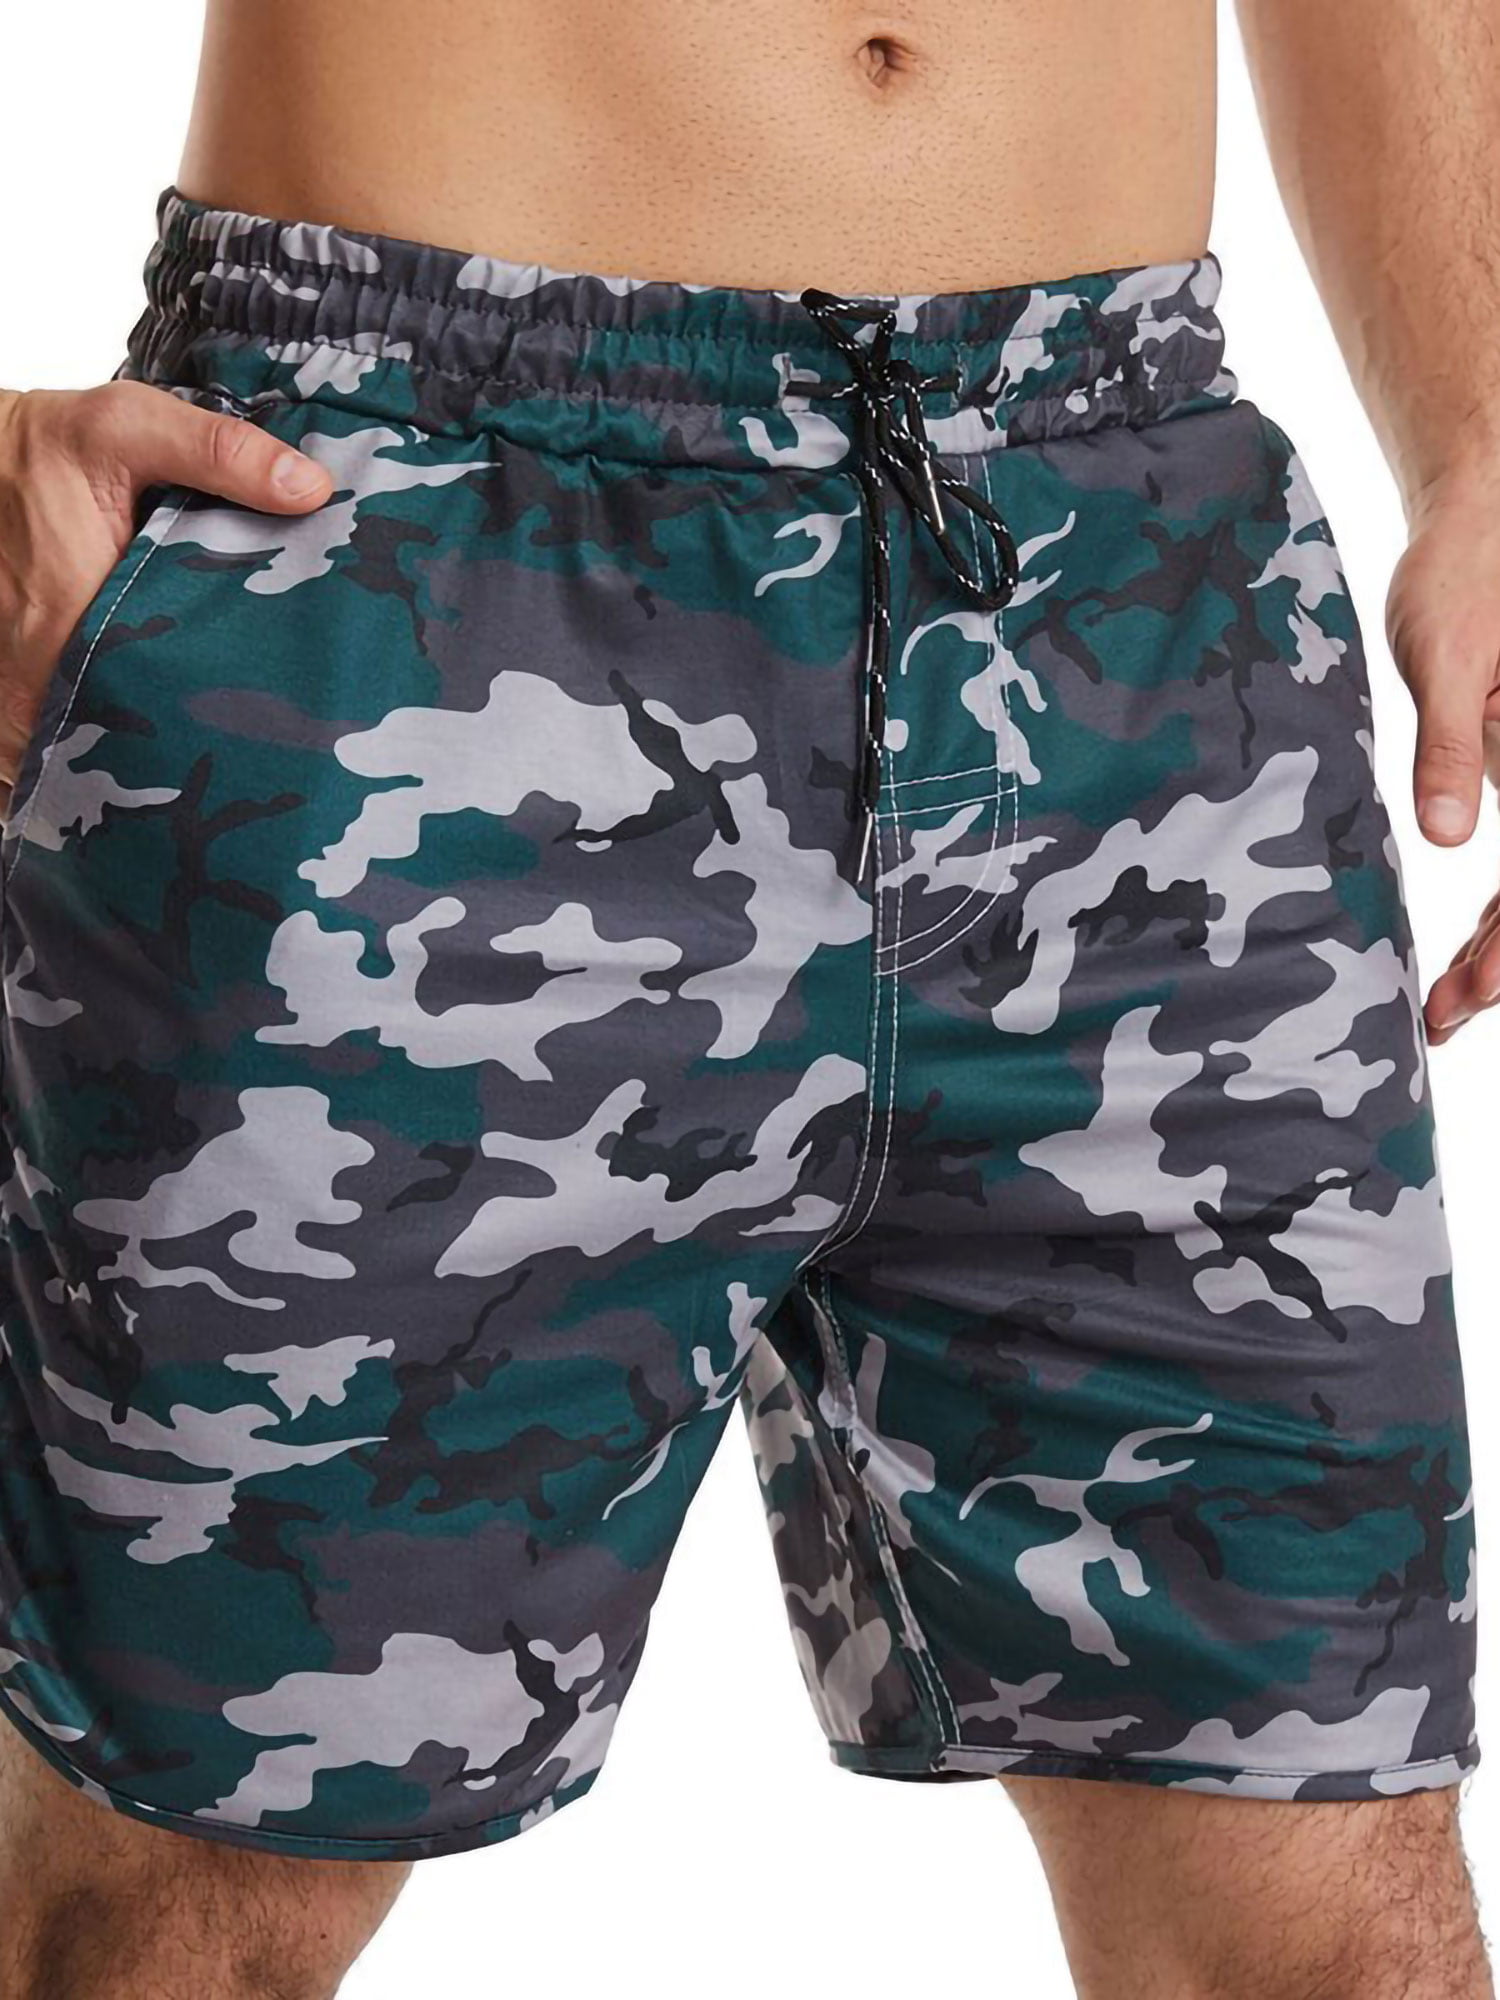 HailinED Mens Green Camouflage Camo Army Swim Trunks Casual Beach Shorts Graphic Board Shorts